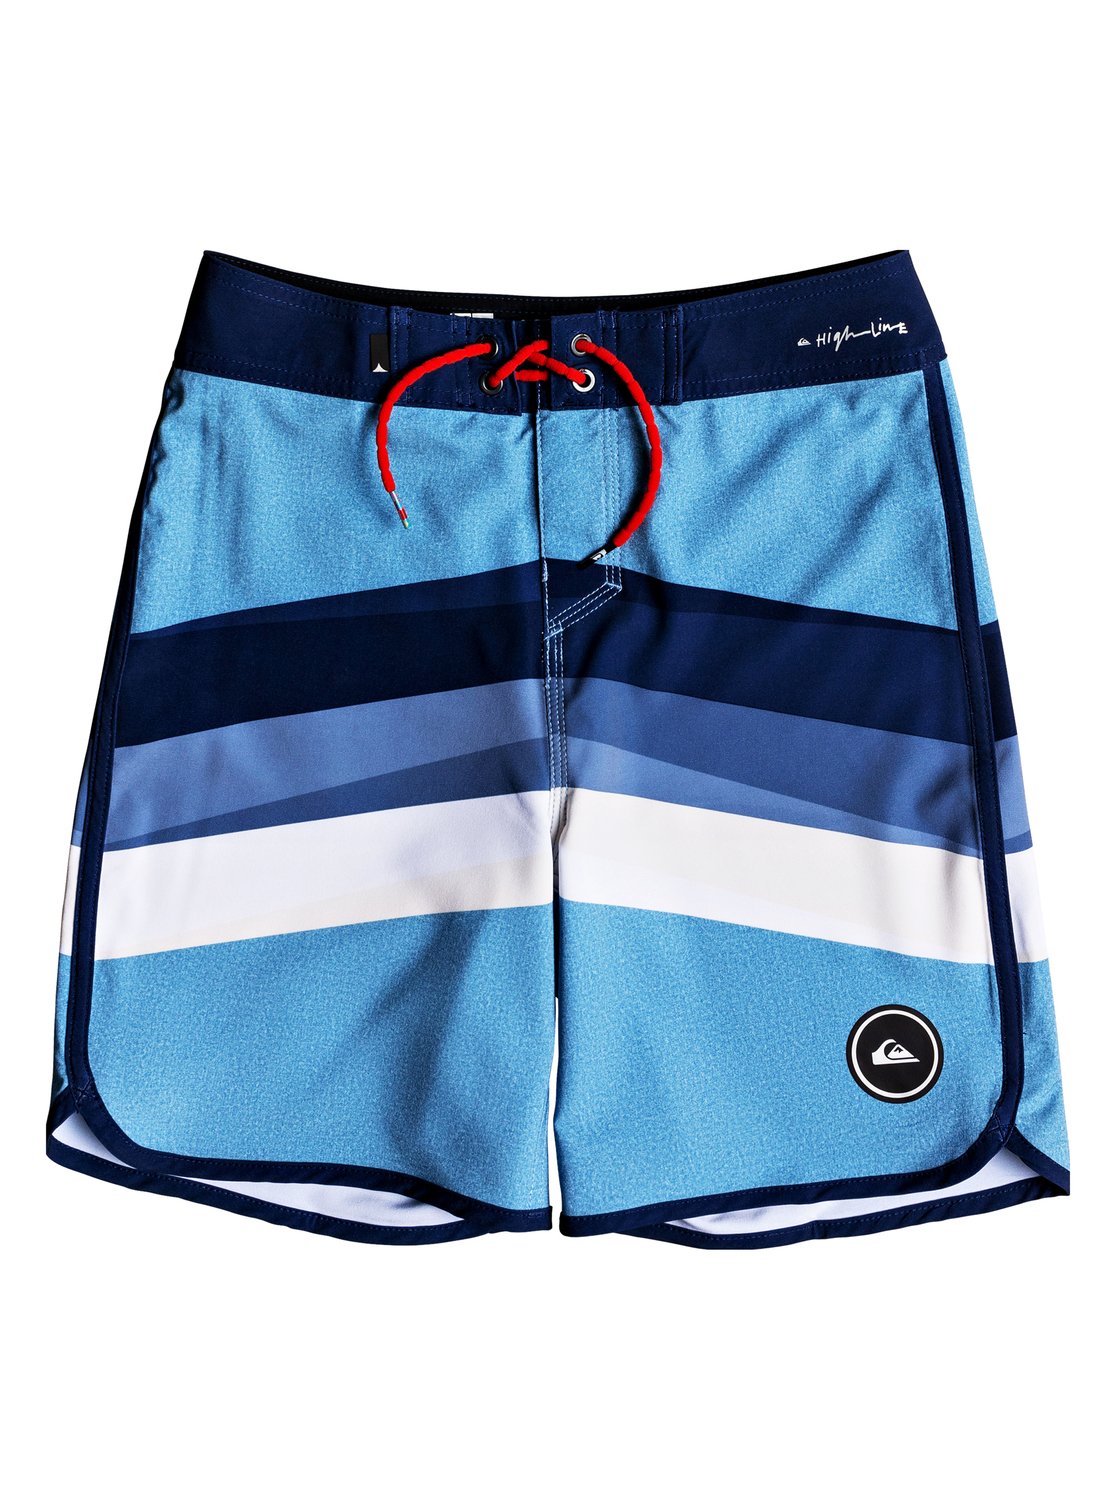 Quiksilver Highline Reverse Youth Boardshort BNG6 26/12